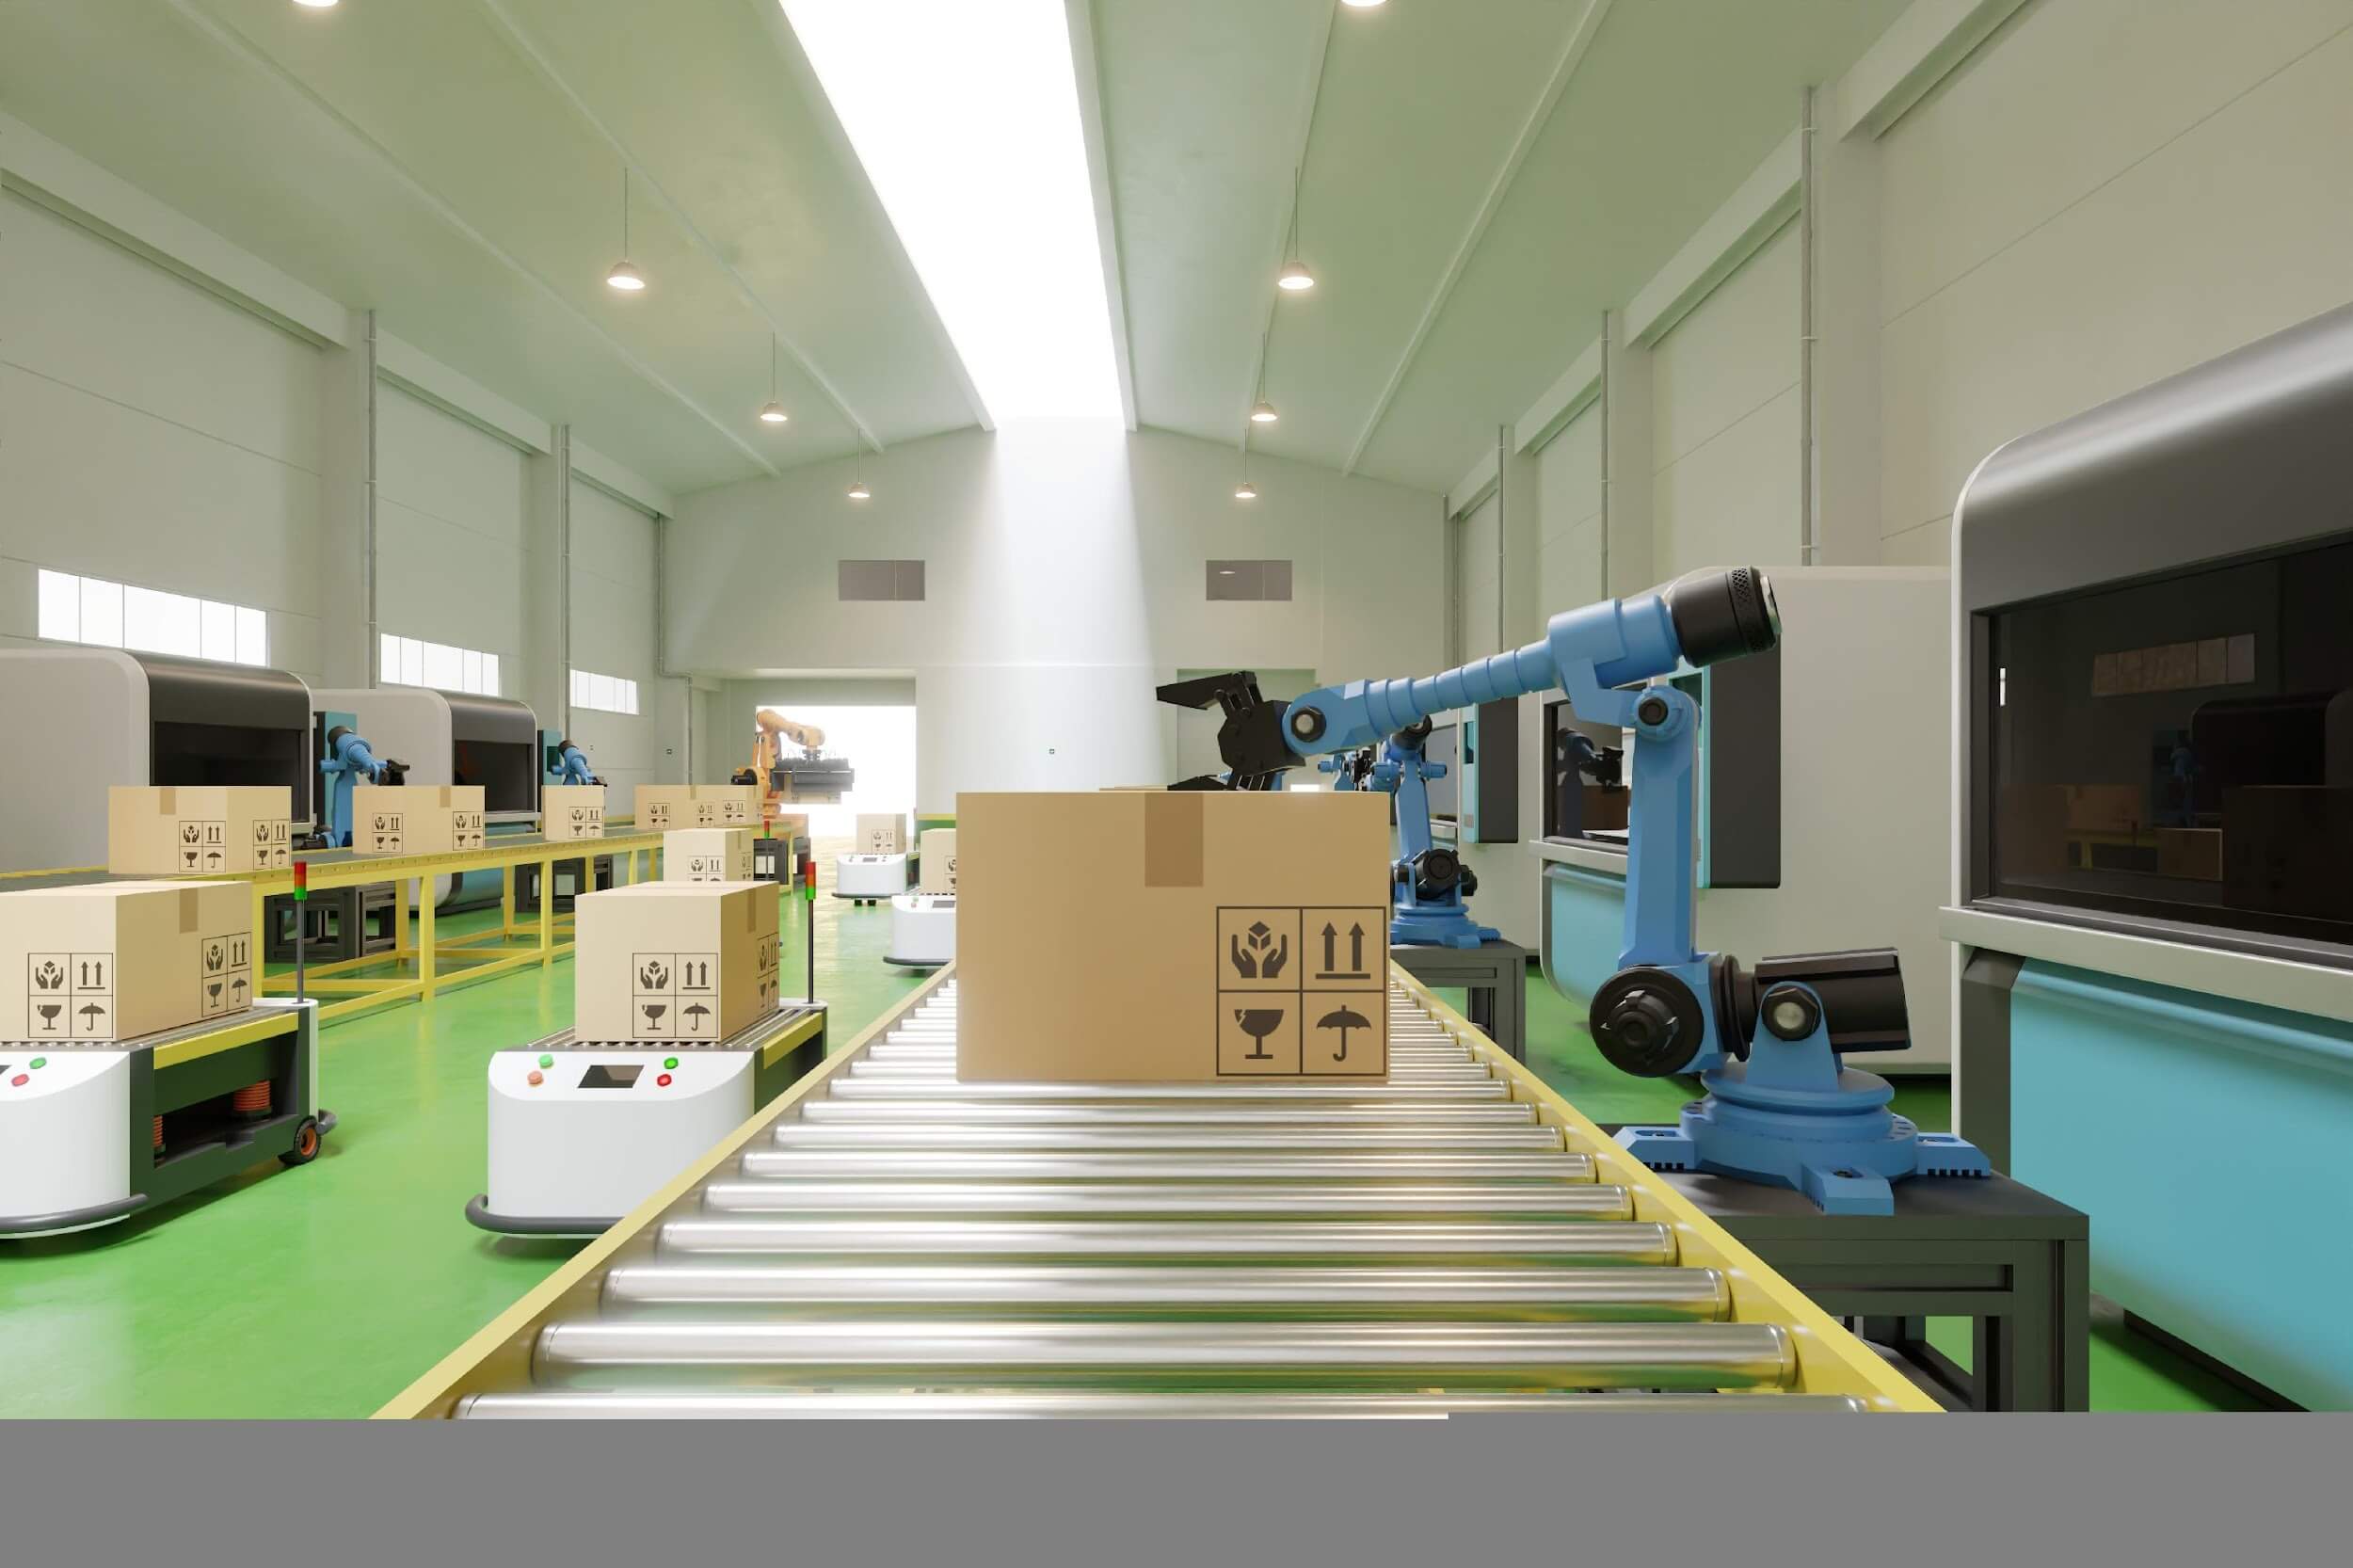 Automated machines scanning and packing products in factory